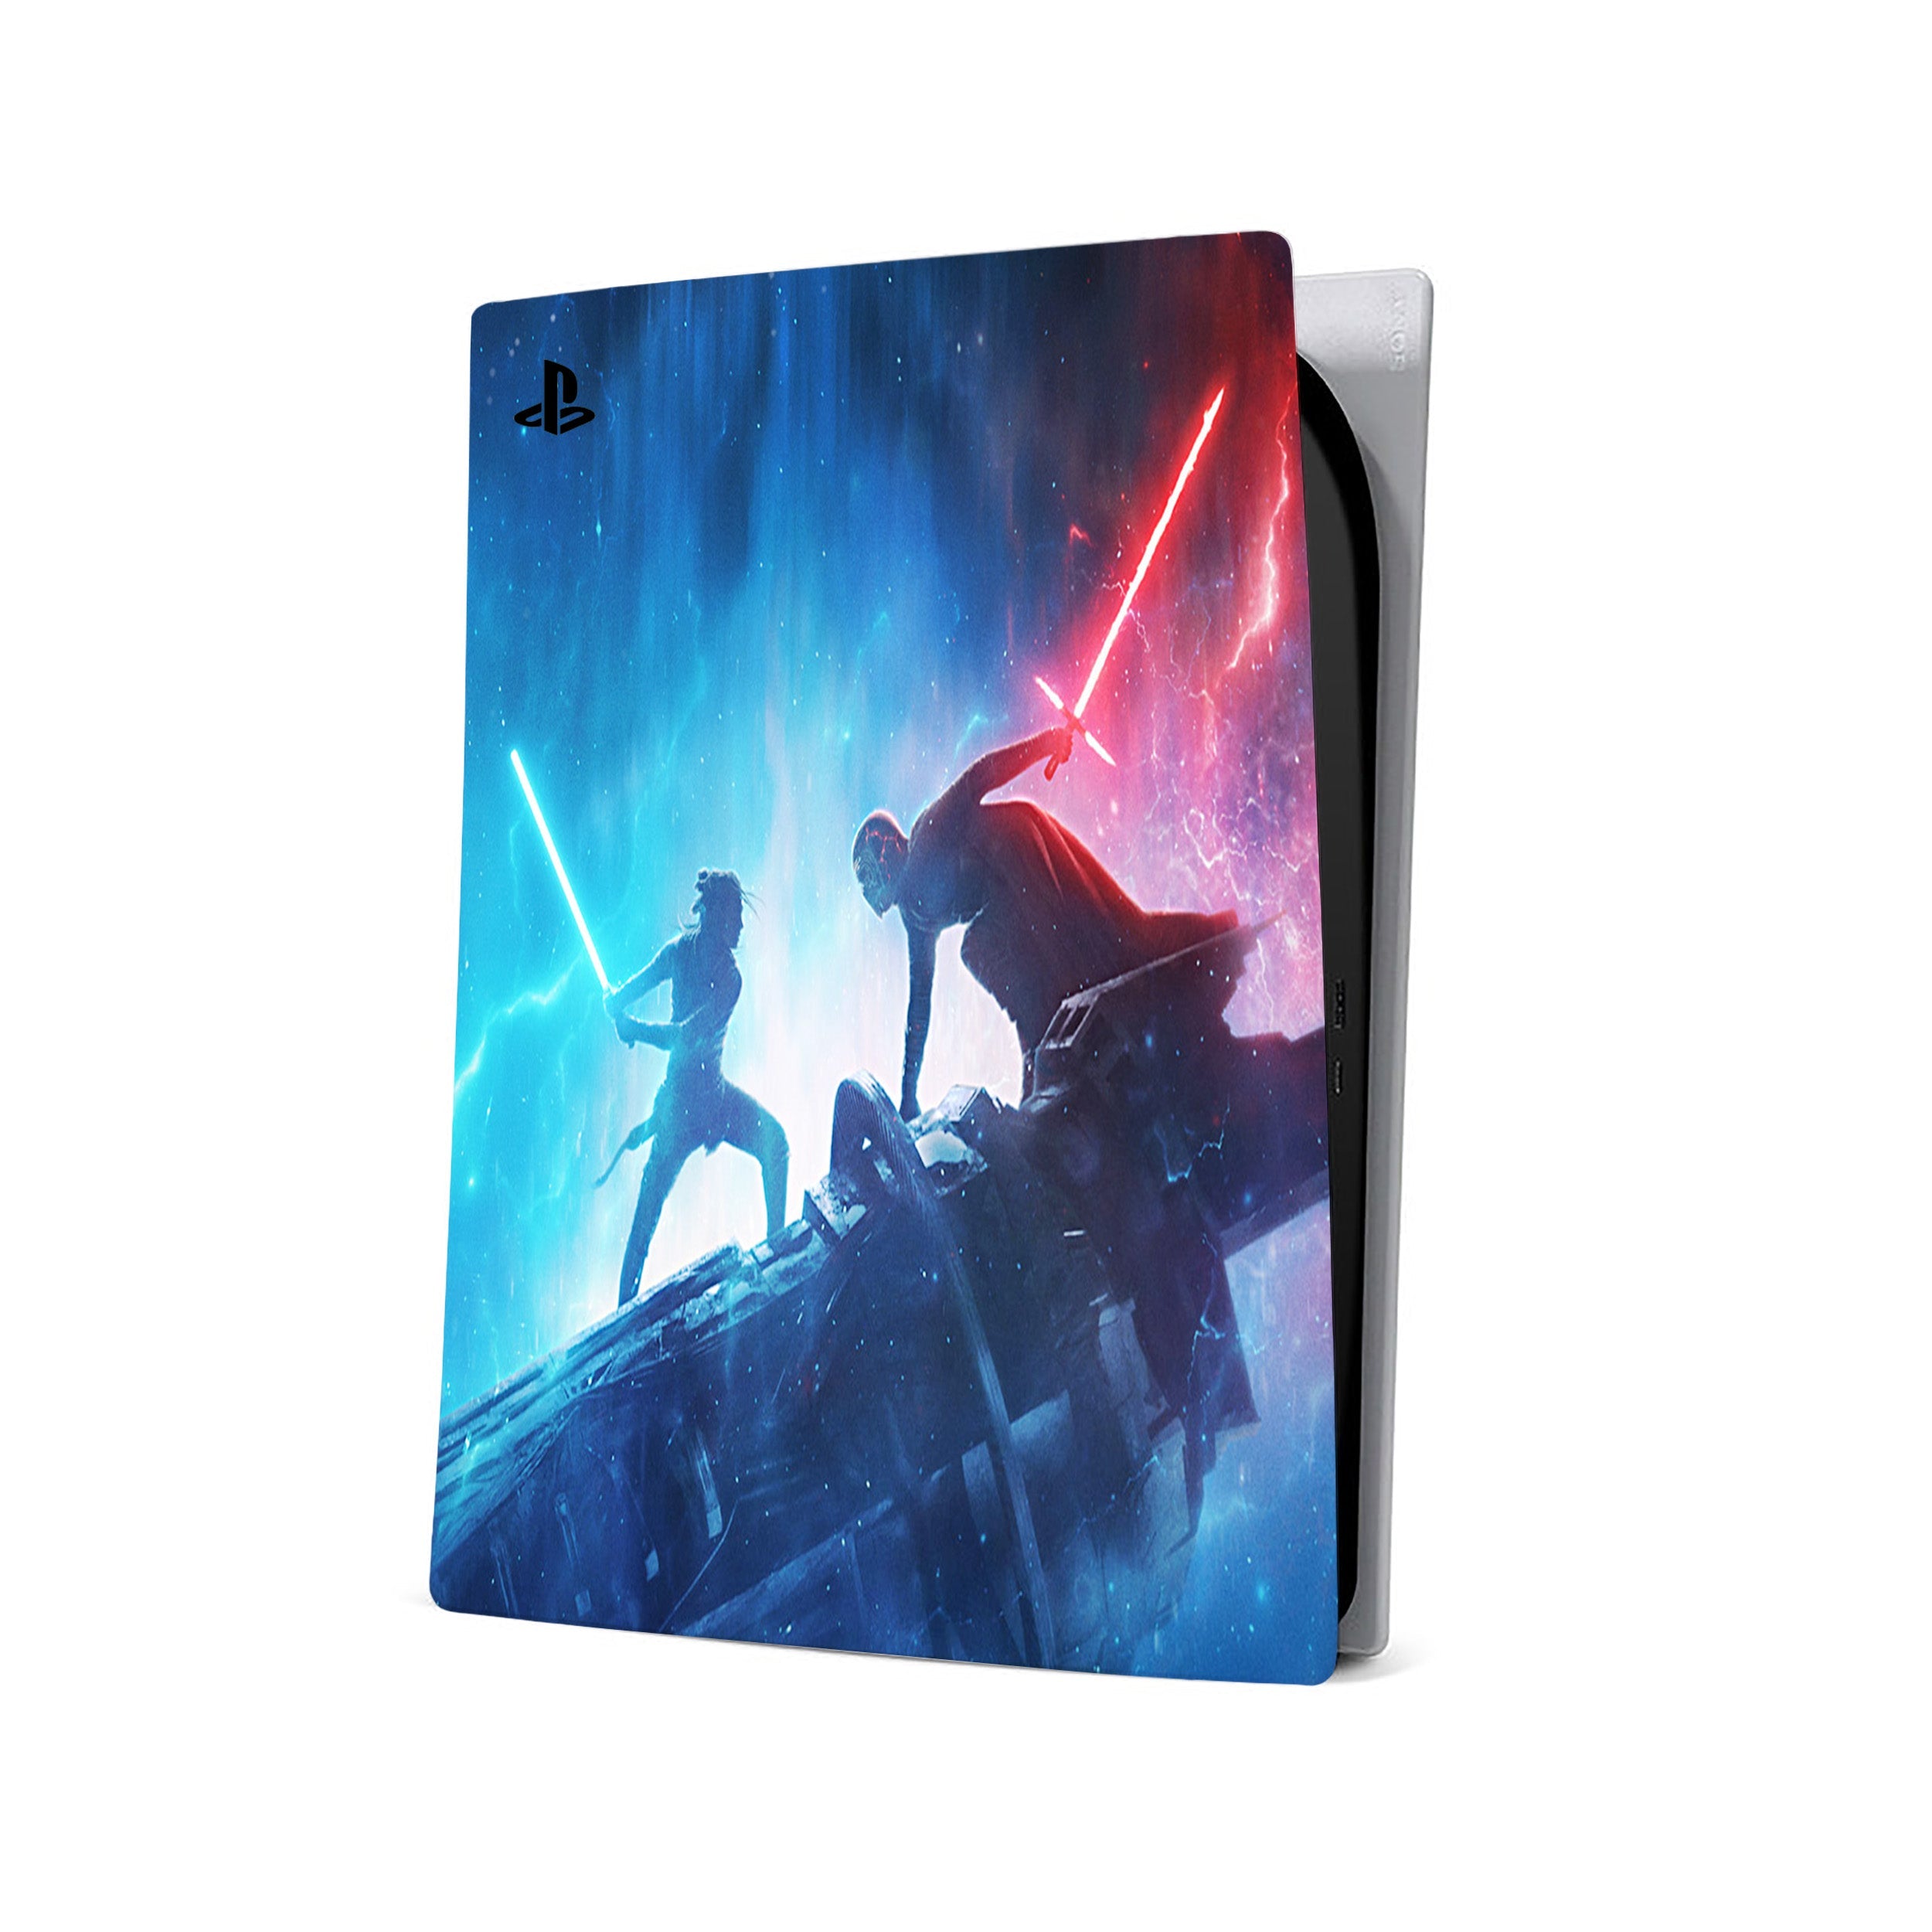 A video game skin featuring a Star Wars The Rise of Skywalker design for the PS5.